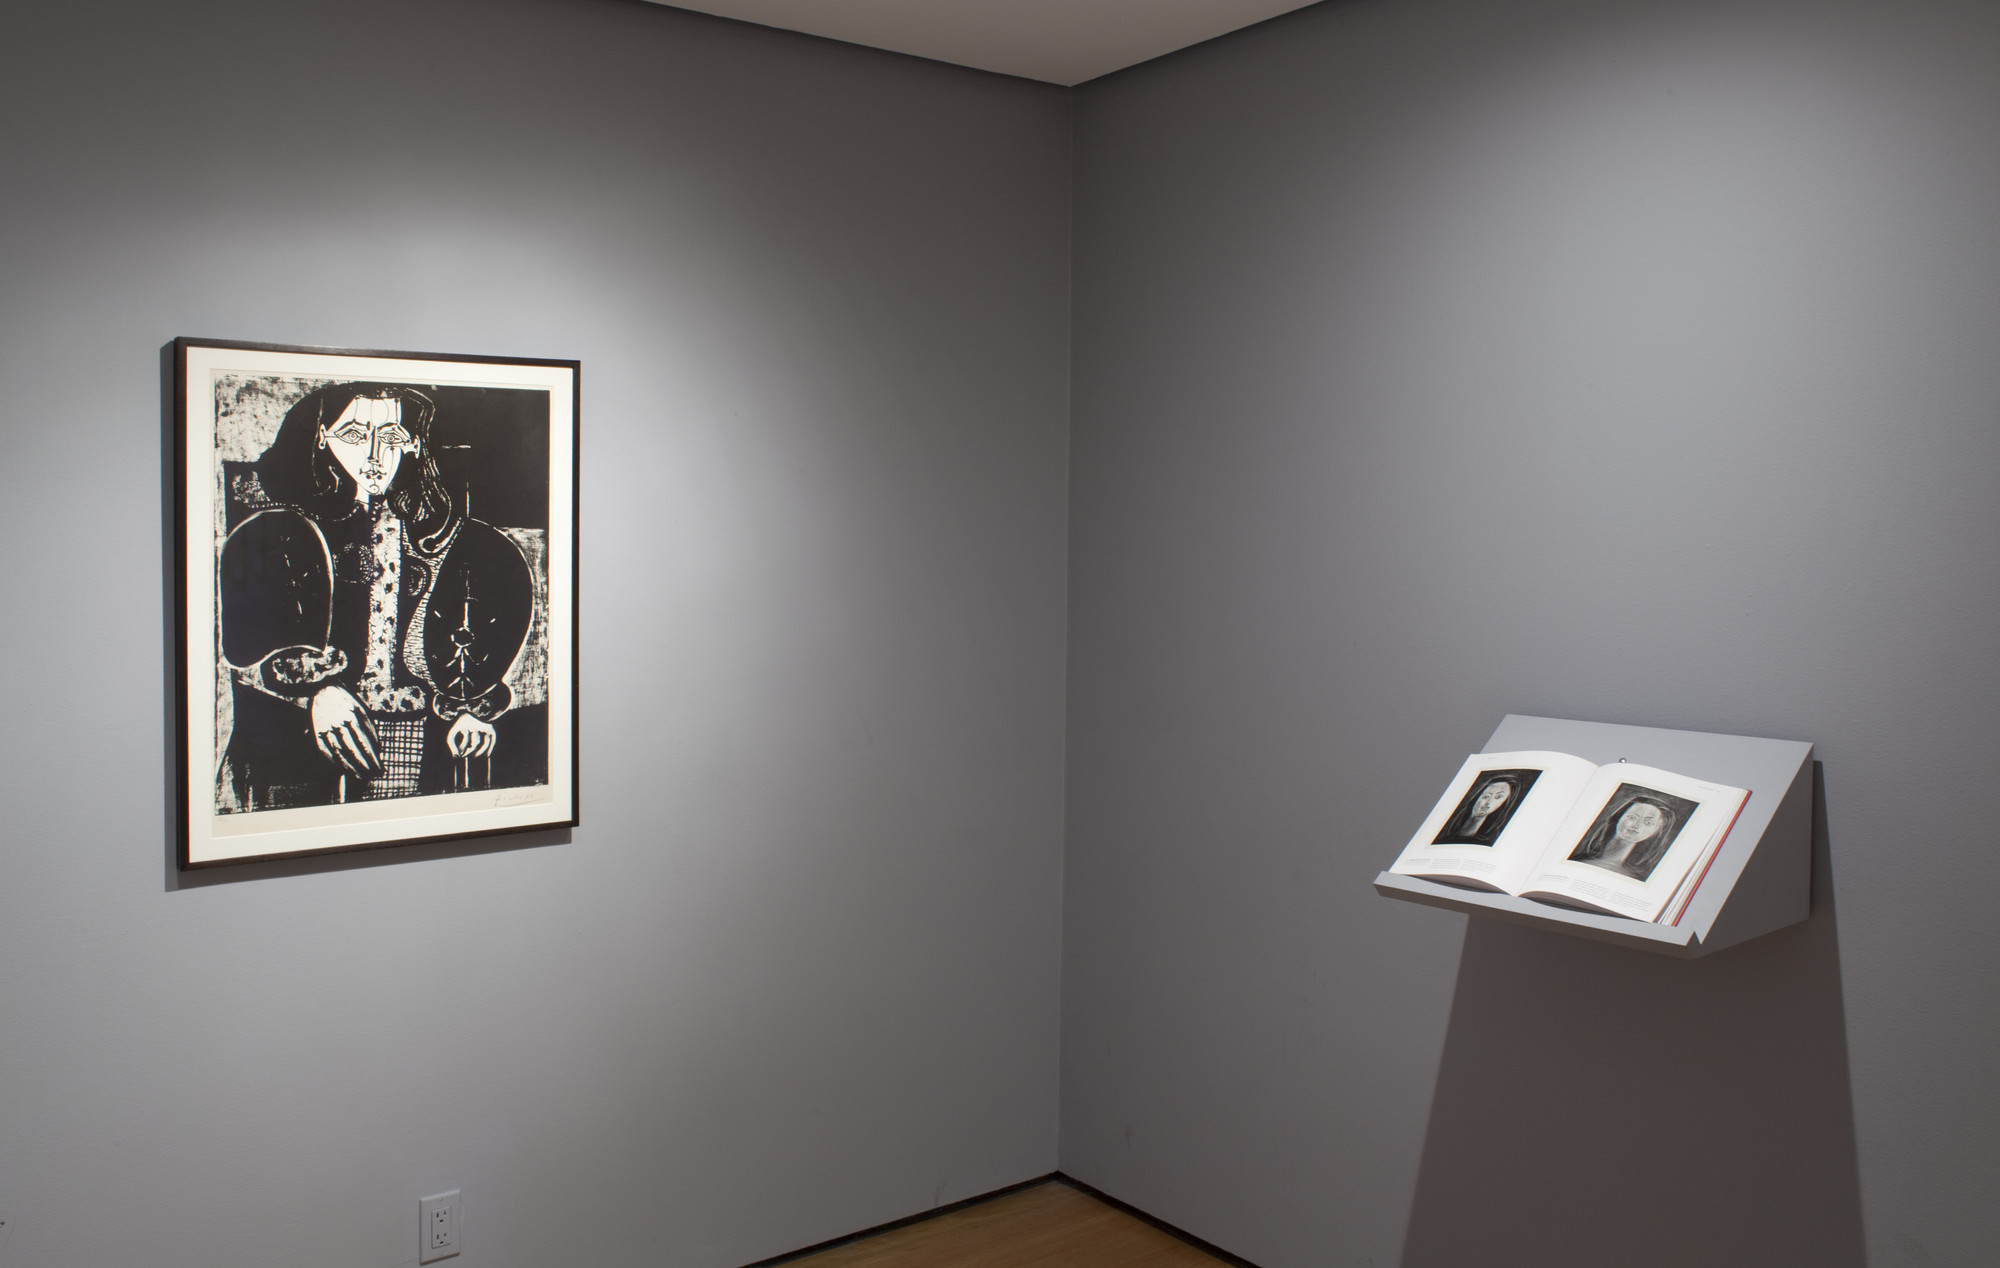 Installation view of the exhibition "Picasso Themes and Variations" MoMA